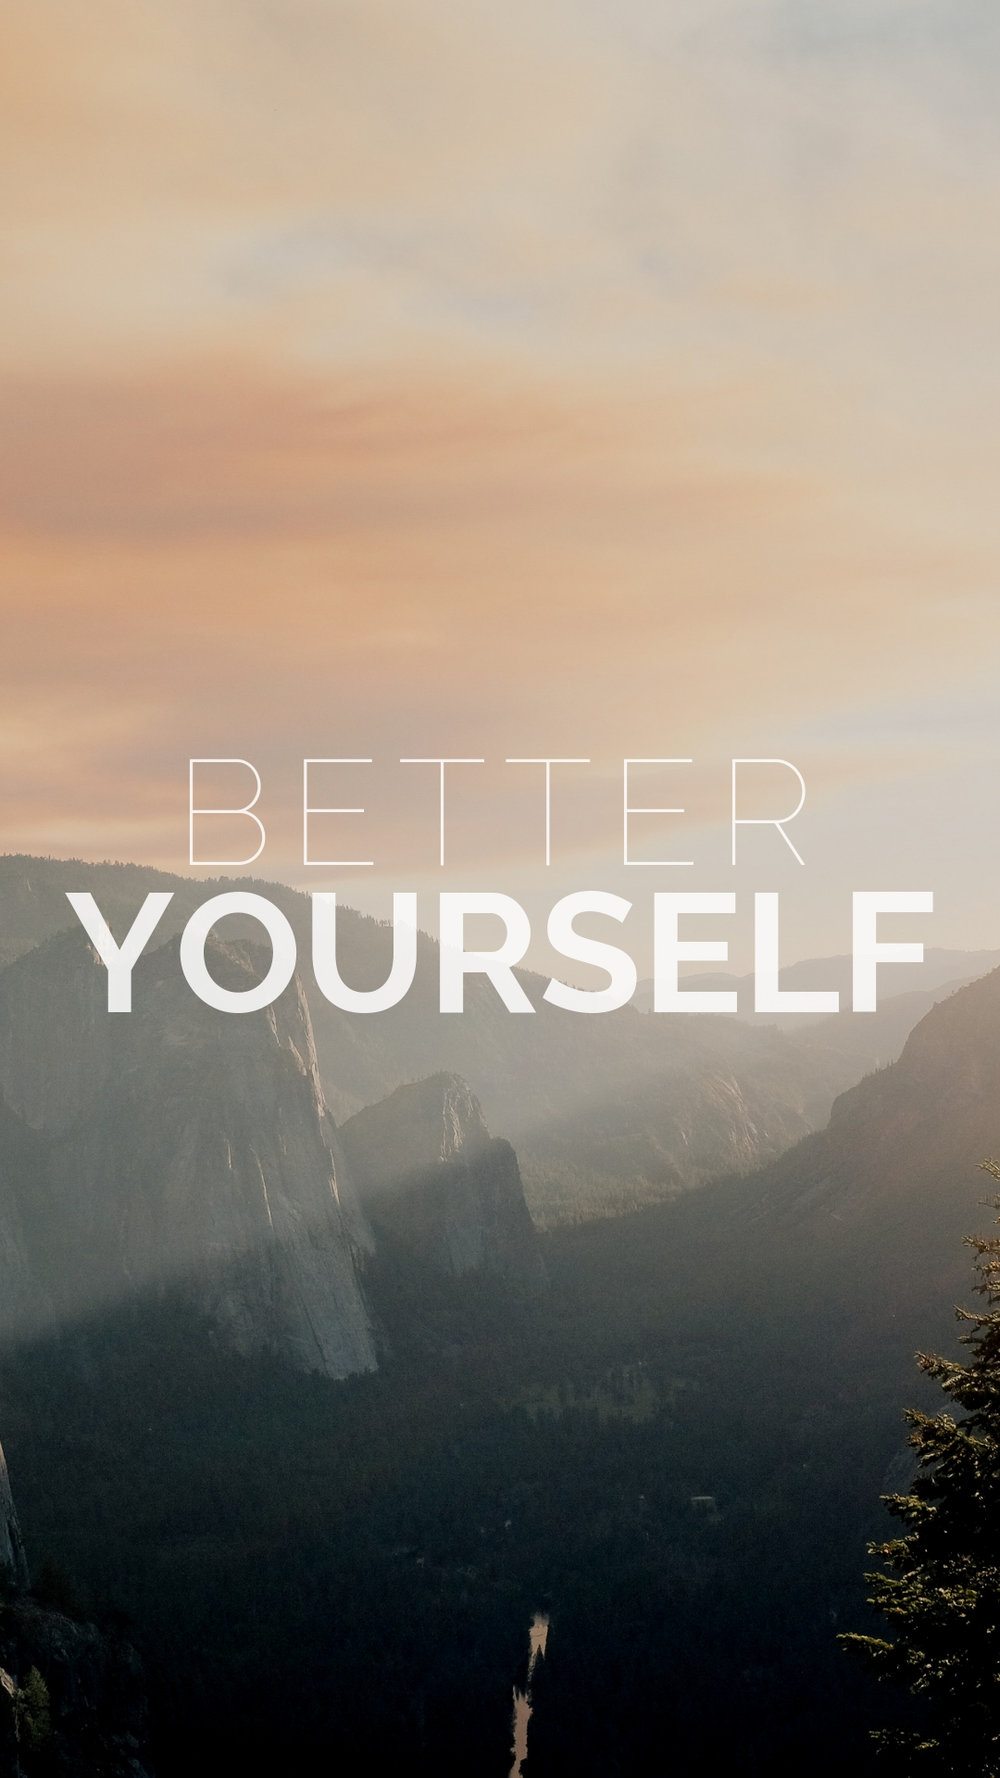 BETTERYOURSELF Backgrounds — DUNNA DID IT